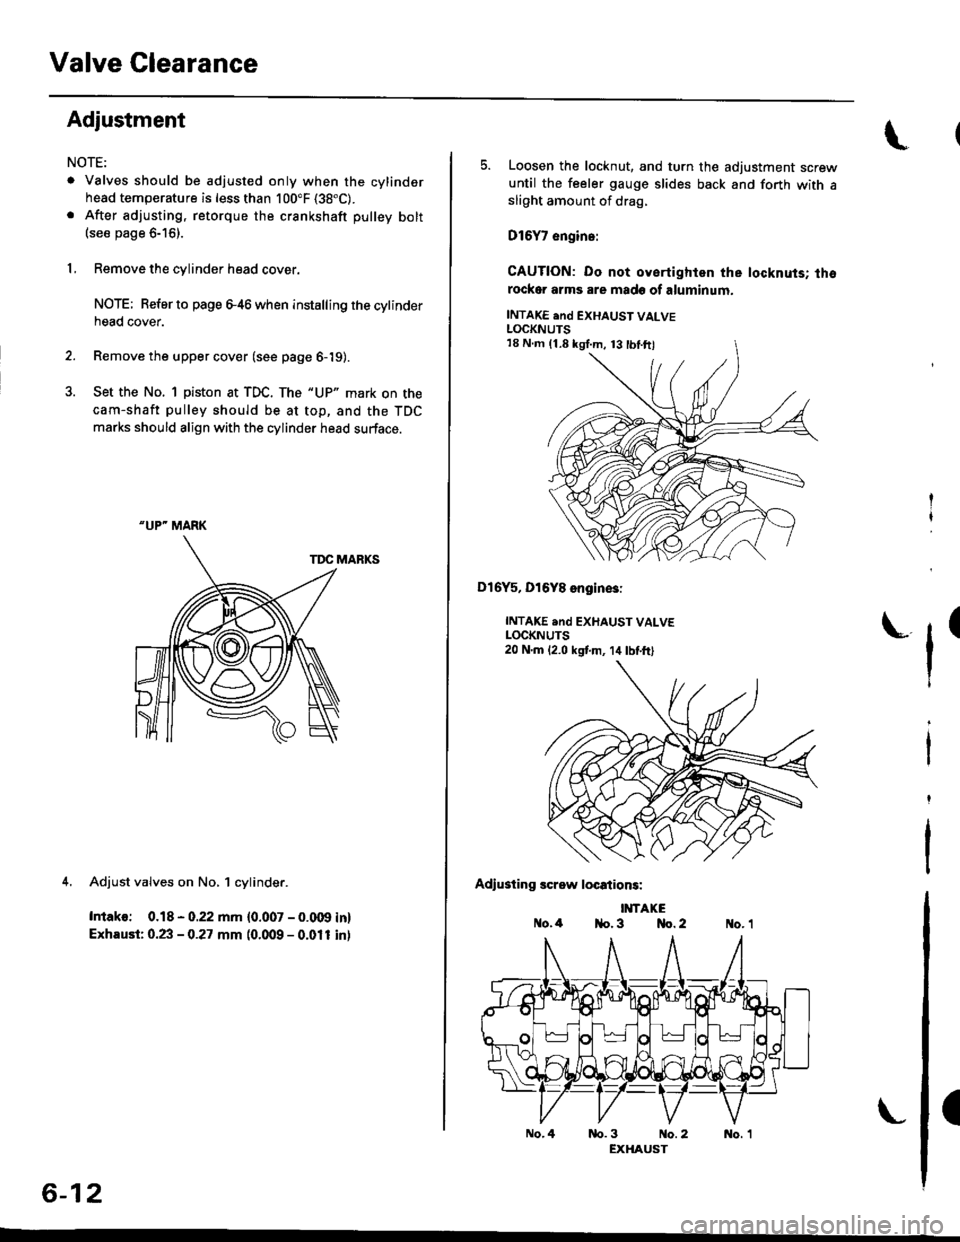 HONDA CIVIC 1997 6.G Workshop Manual Valve Clearance
Adjustment
NOTE:
. Valves should be adjusted only when the cylindsrhead temperature is less than 100"F (38"C).
. After adjusting, retorque the crankshaft pulley bolt(see page 6-16).
1,